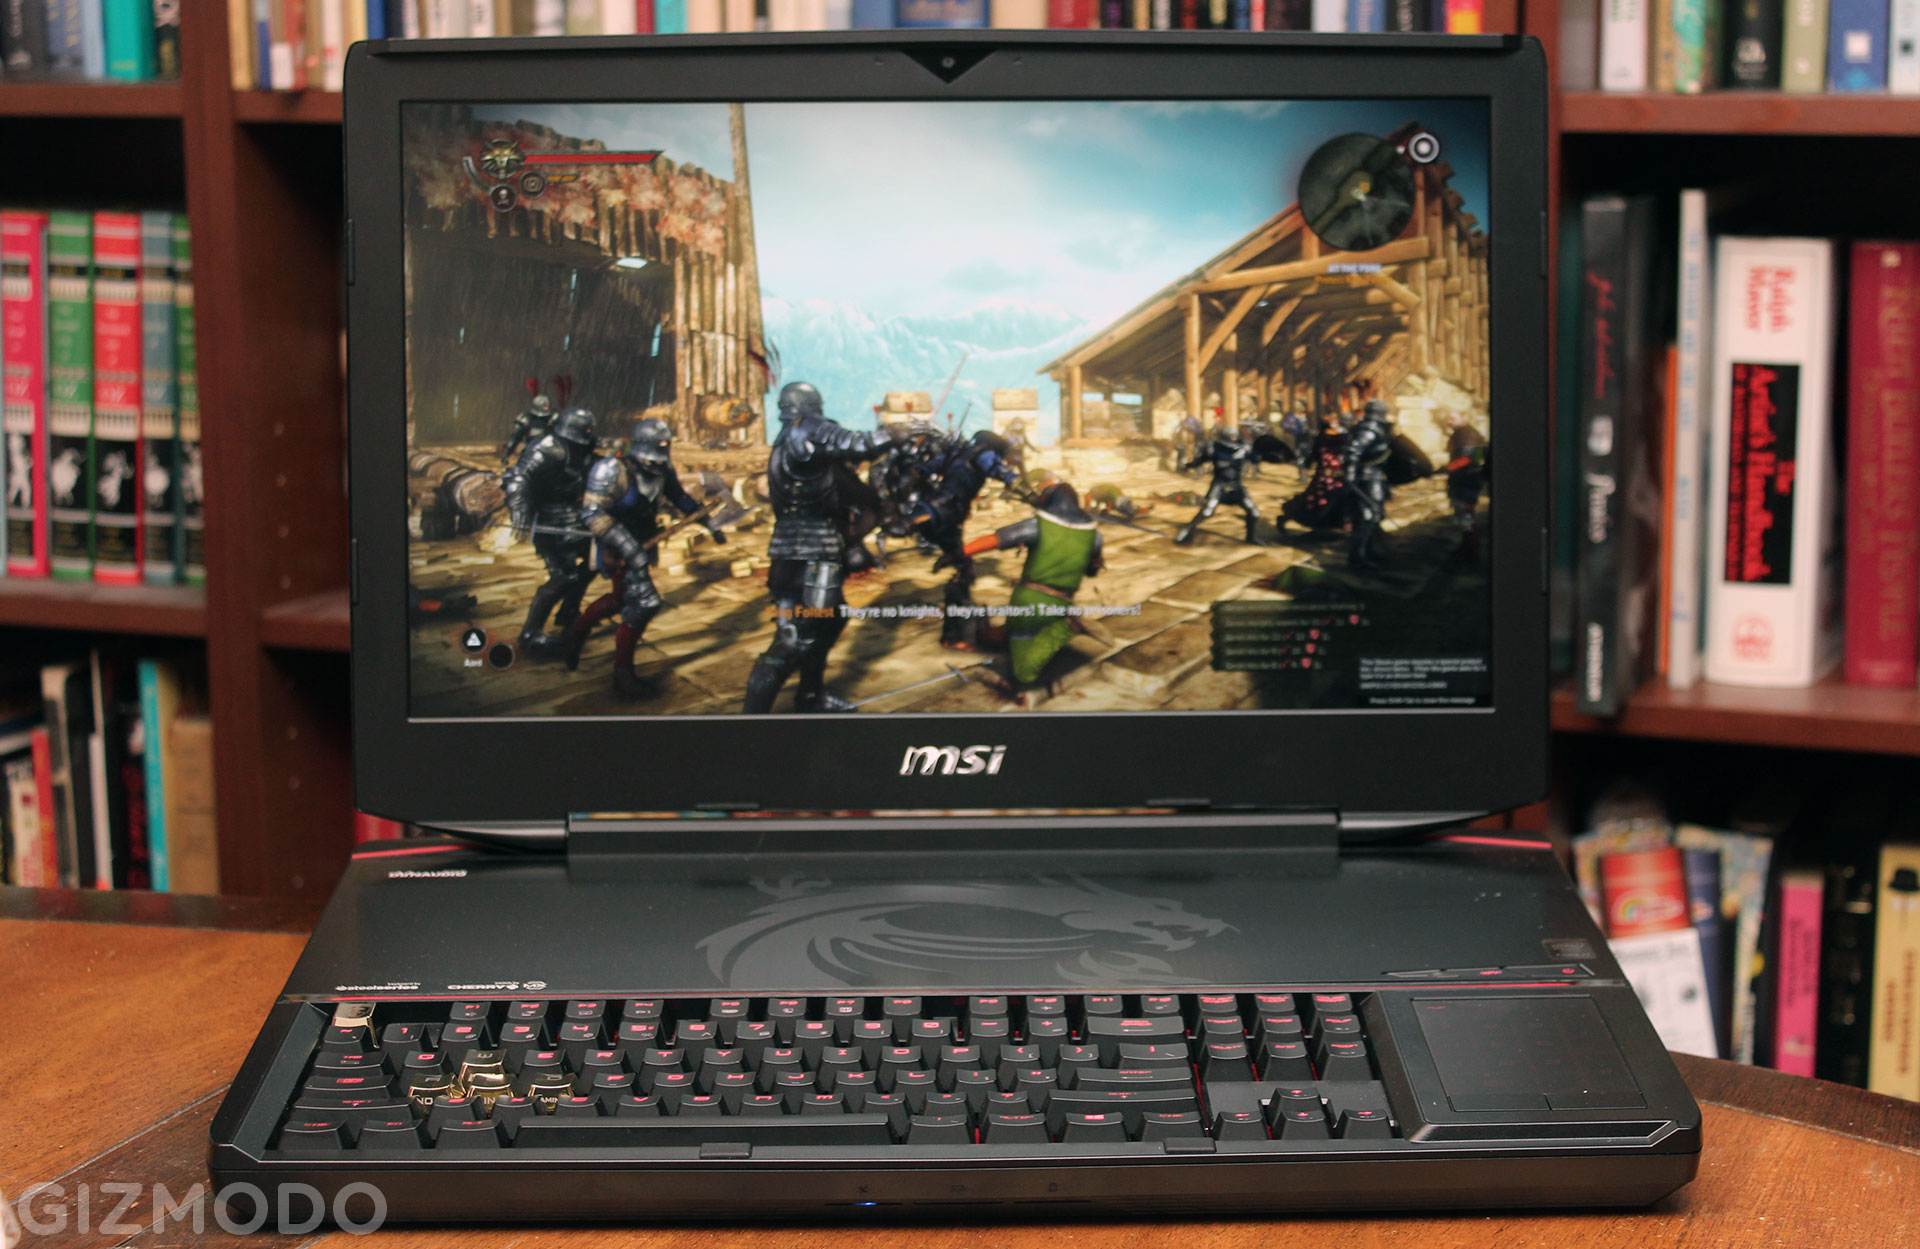 Review: The Delightfully Crazy MSI GT80 Titan Laptop